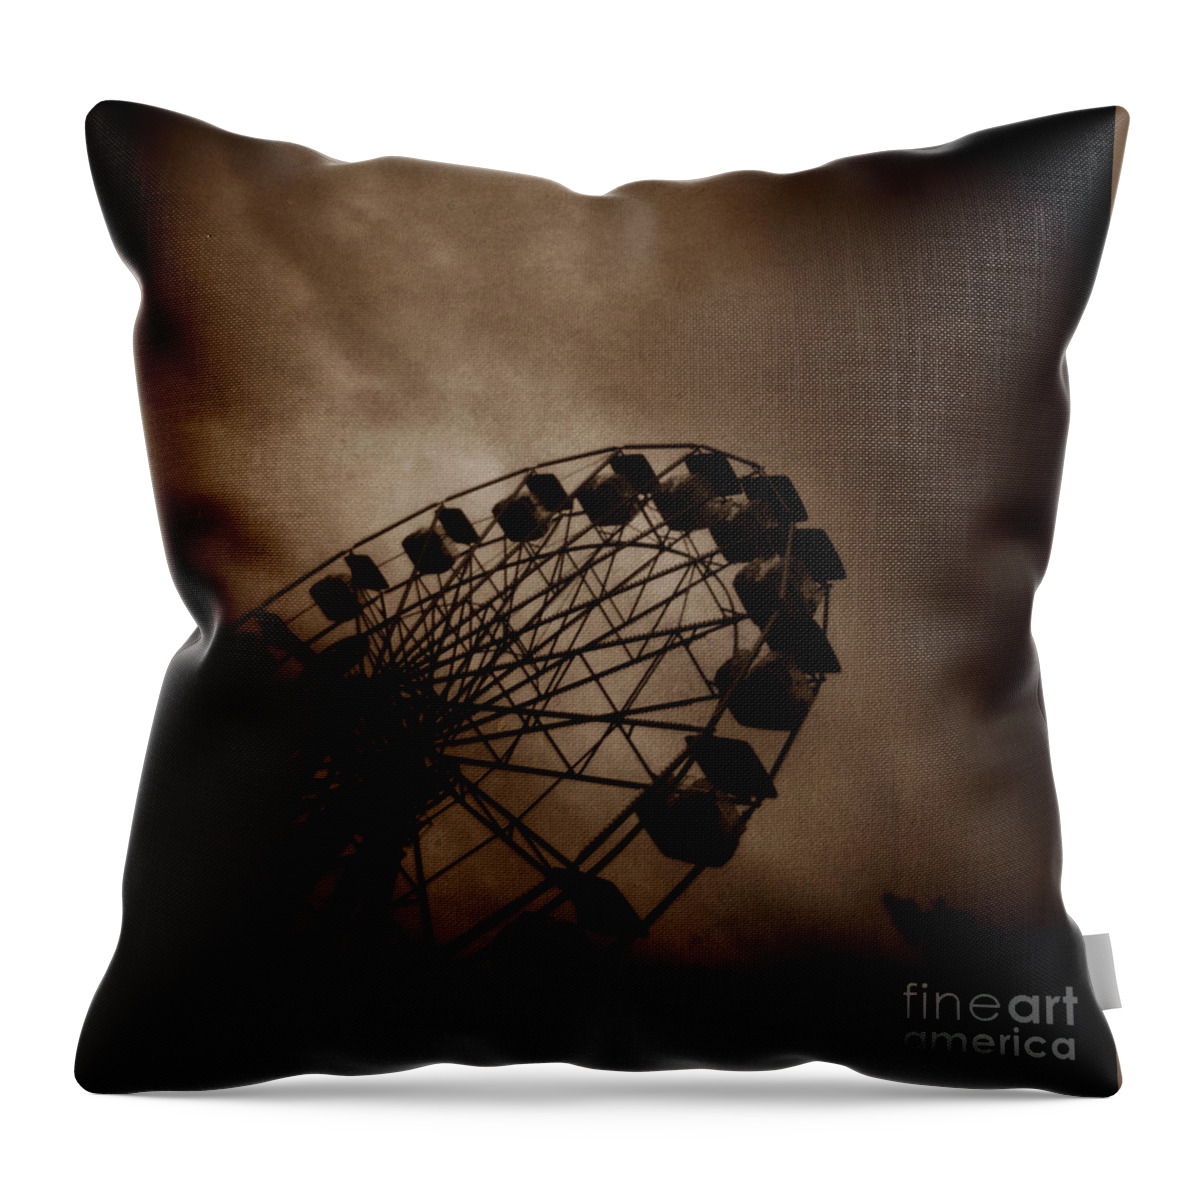 Something Wicked This Way Comes Throw Pillow featuring the photograph Something Wicked by T Lowry Wilson